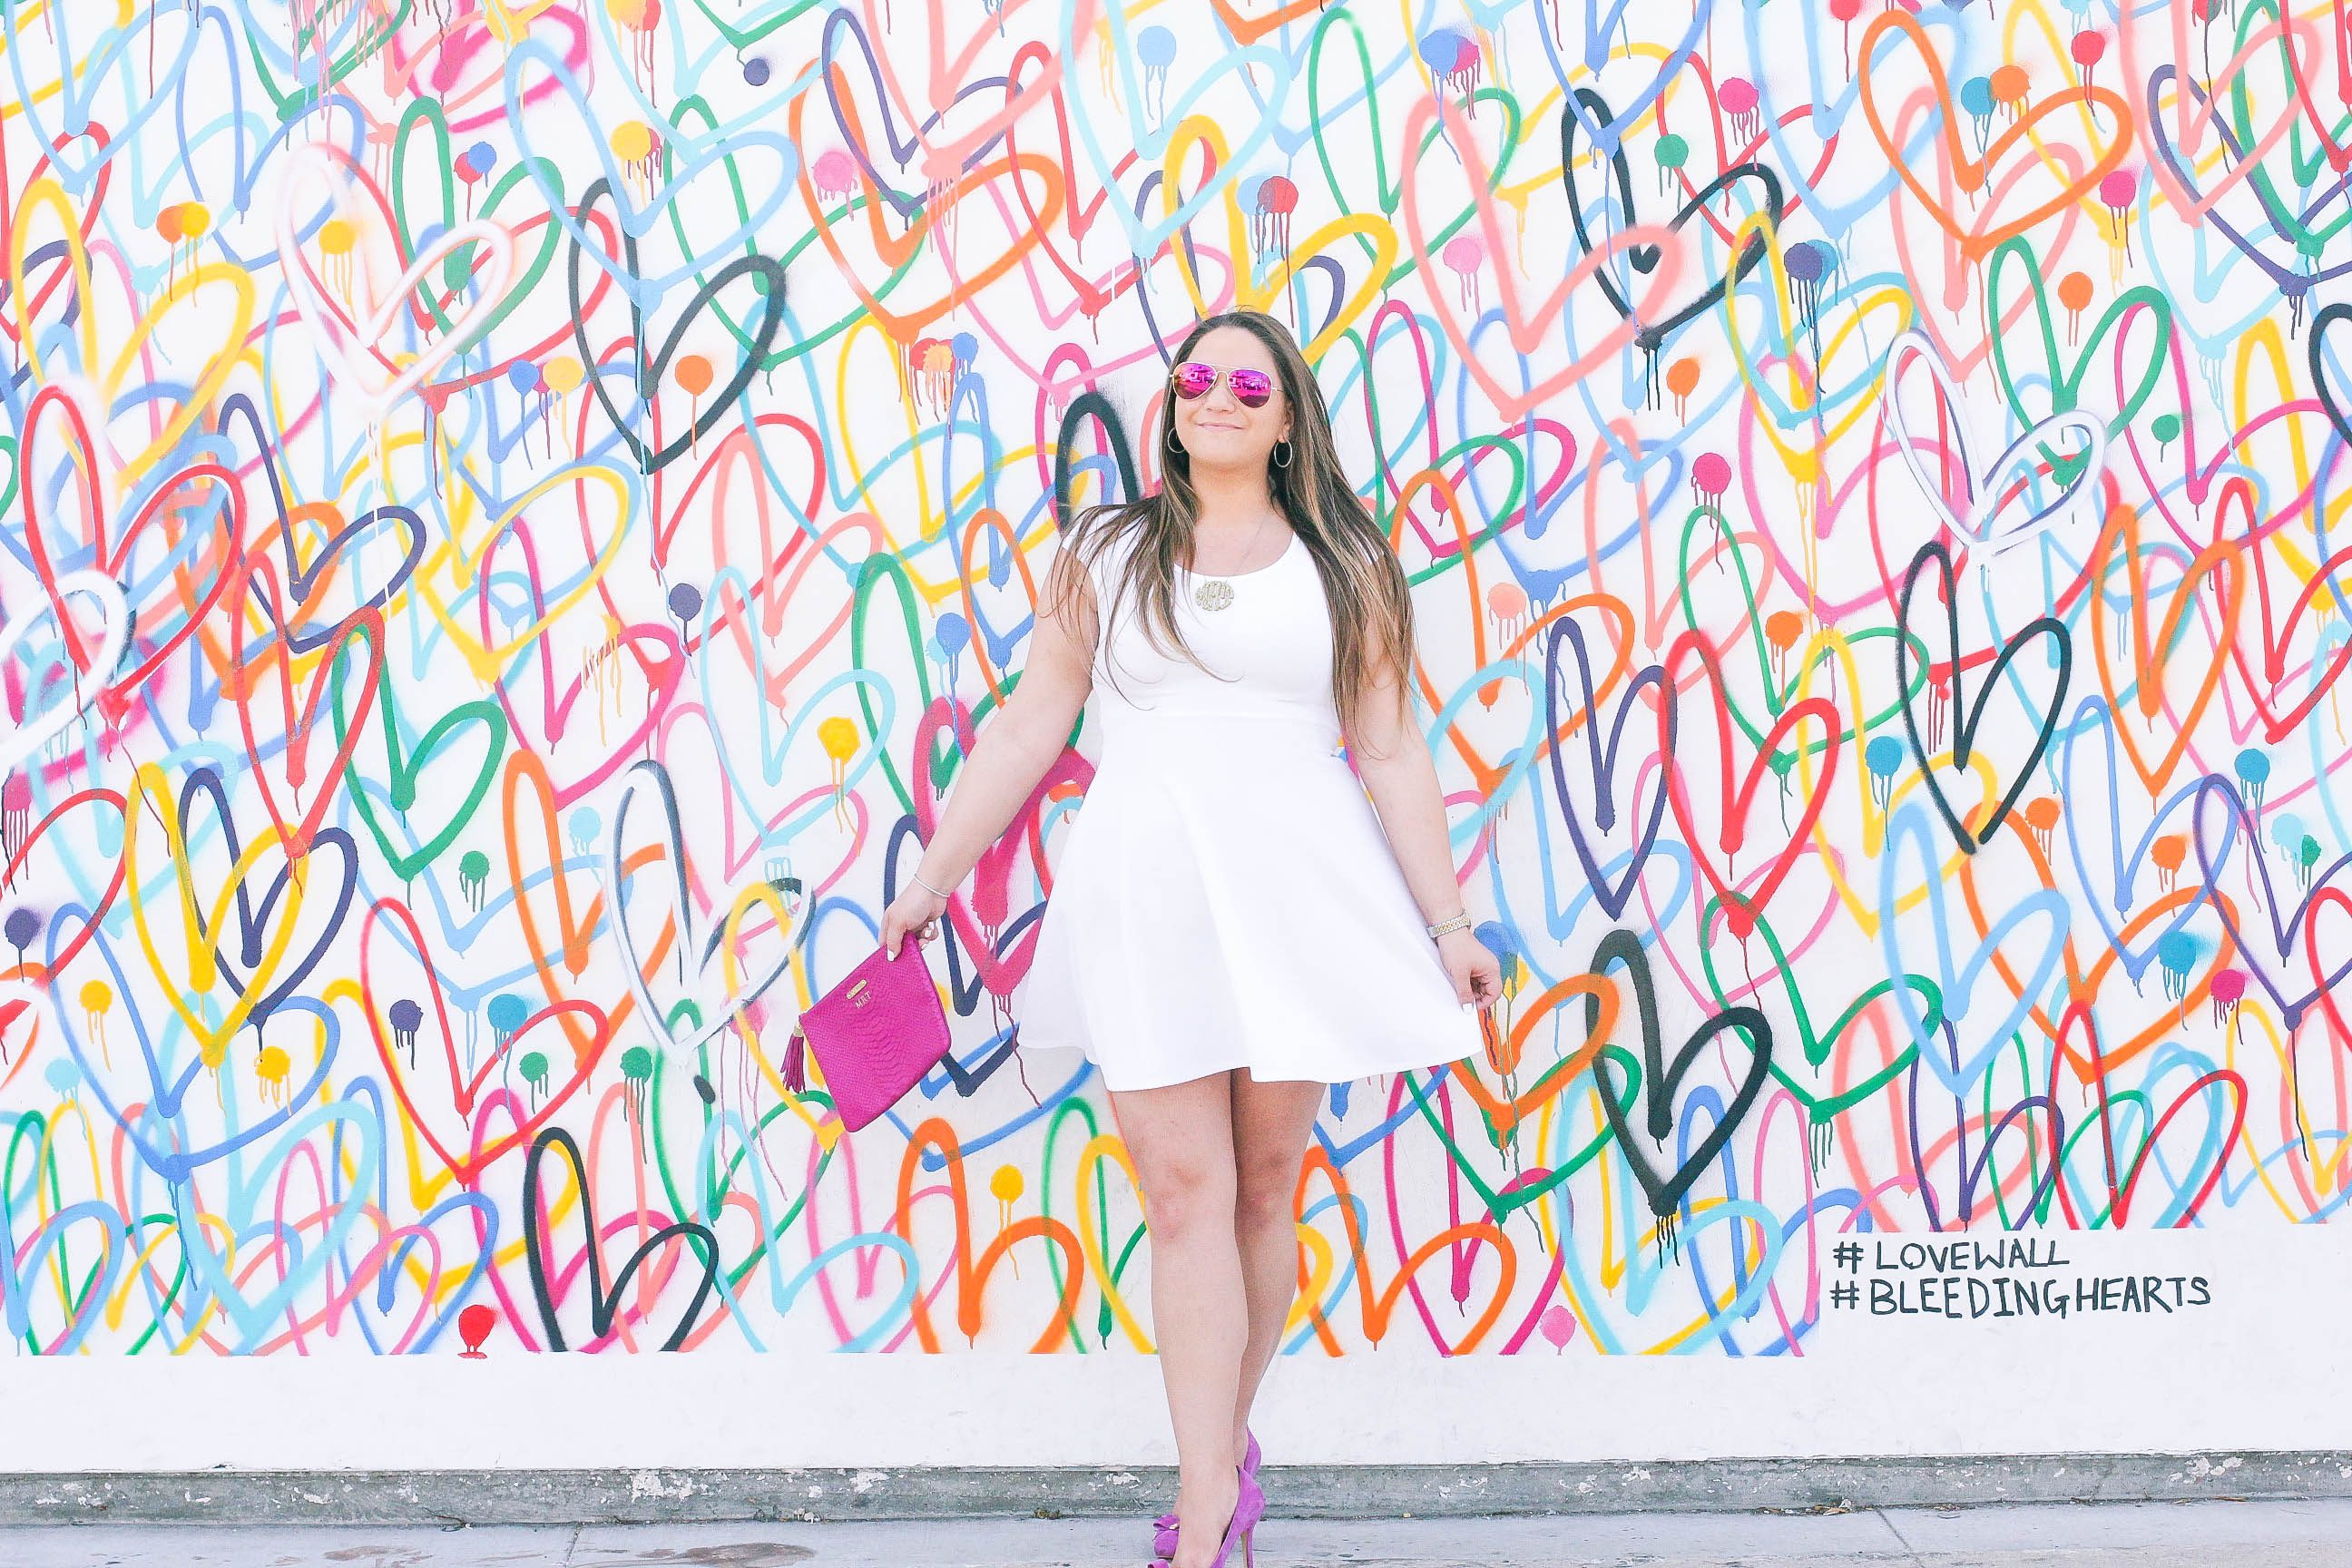 missyonmadison, melissa tierney, missy on madison instagram, pink pumps, pink bow pumps, michael kors heels, fuschia pink pumps, fuschia pumps, white dress, white fit and flare dress, gigi ny, gigi ny magenta clutch, pink clutch, pink ray bans, pink aviators, monogram necklace, heart wall, abbot kinney, venice, heart wall venice, vday, valentines day, valentines day style,